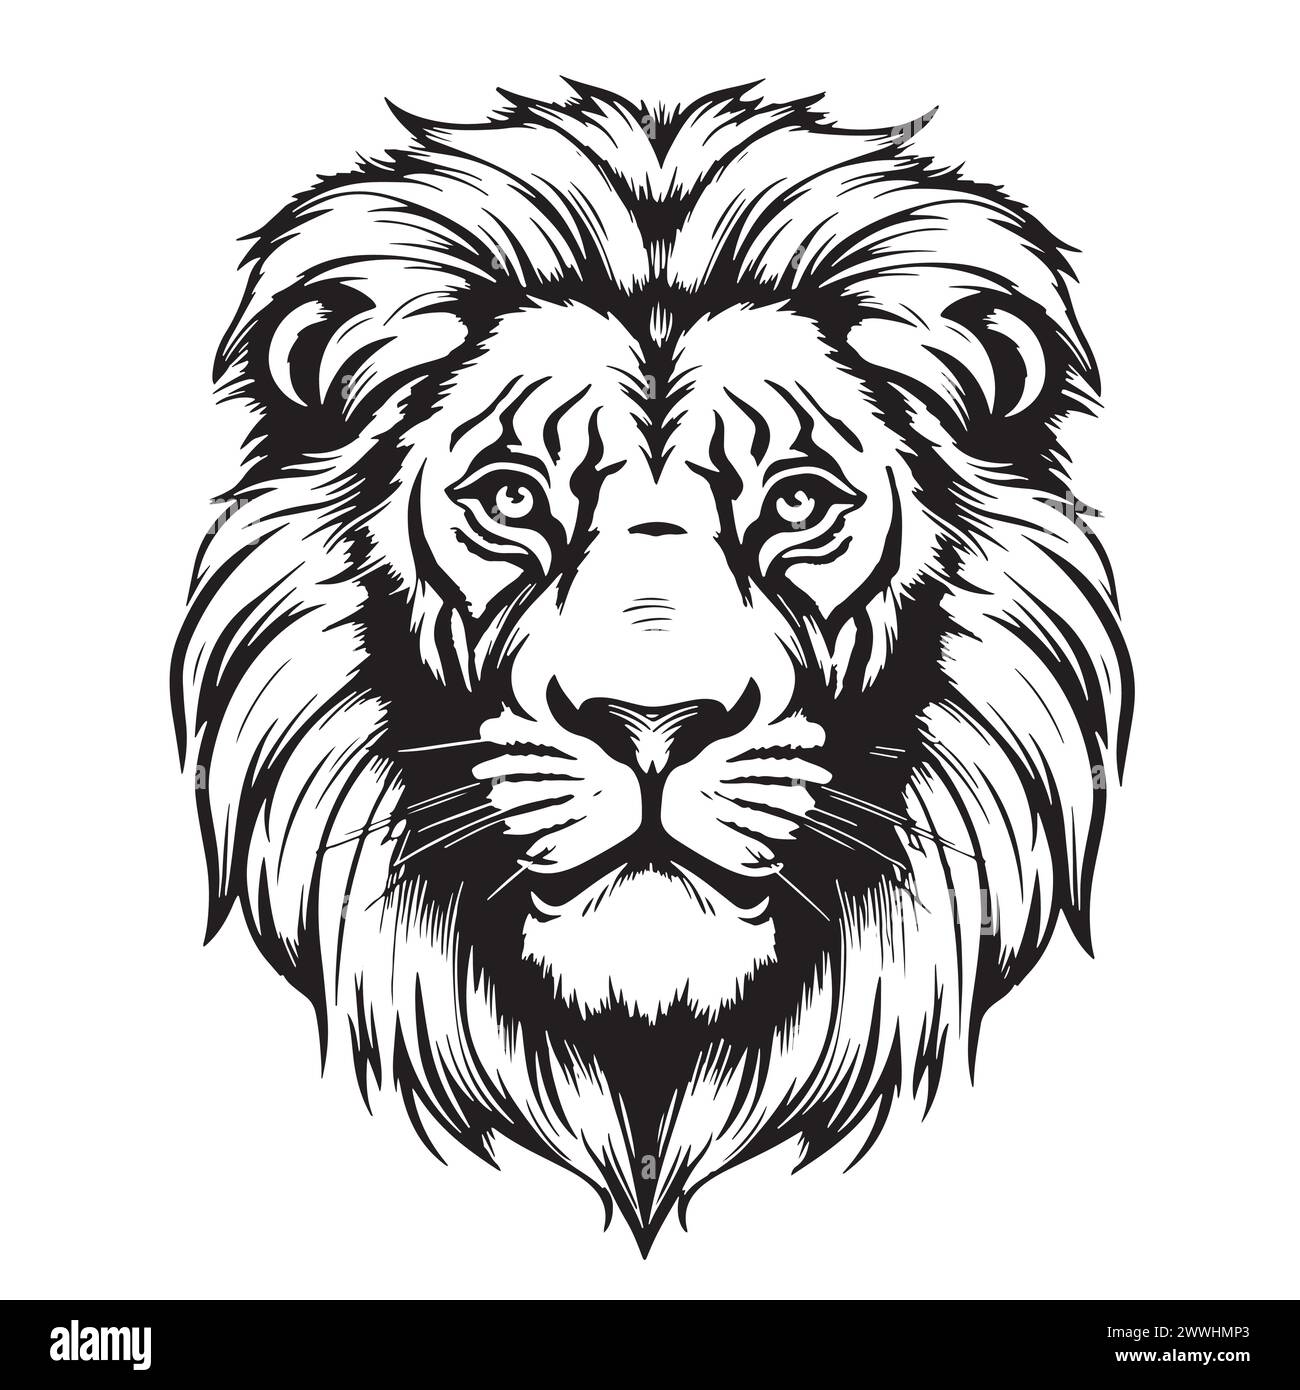 Lion. Sketchy, graphical, black and white portrait of a lion head on a white background. Stock Vector